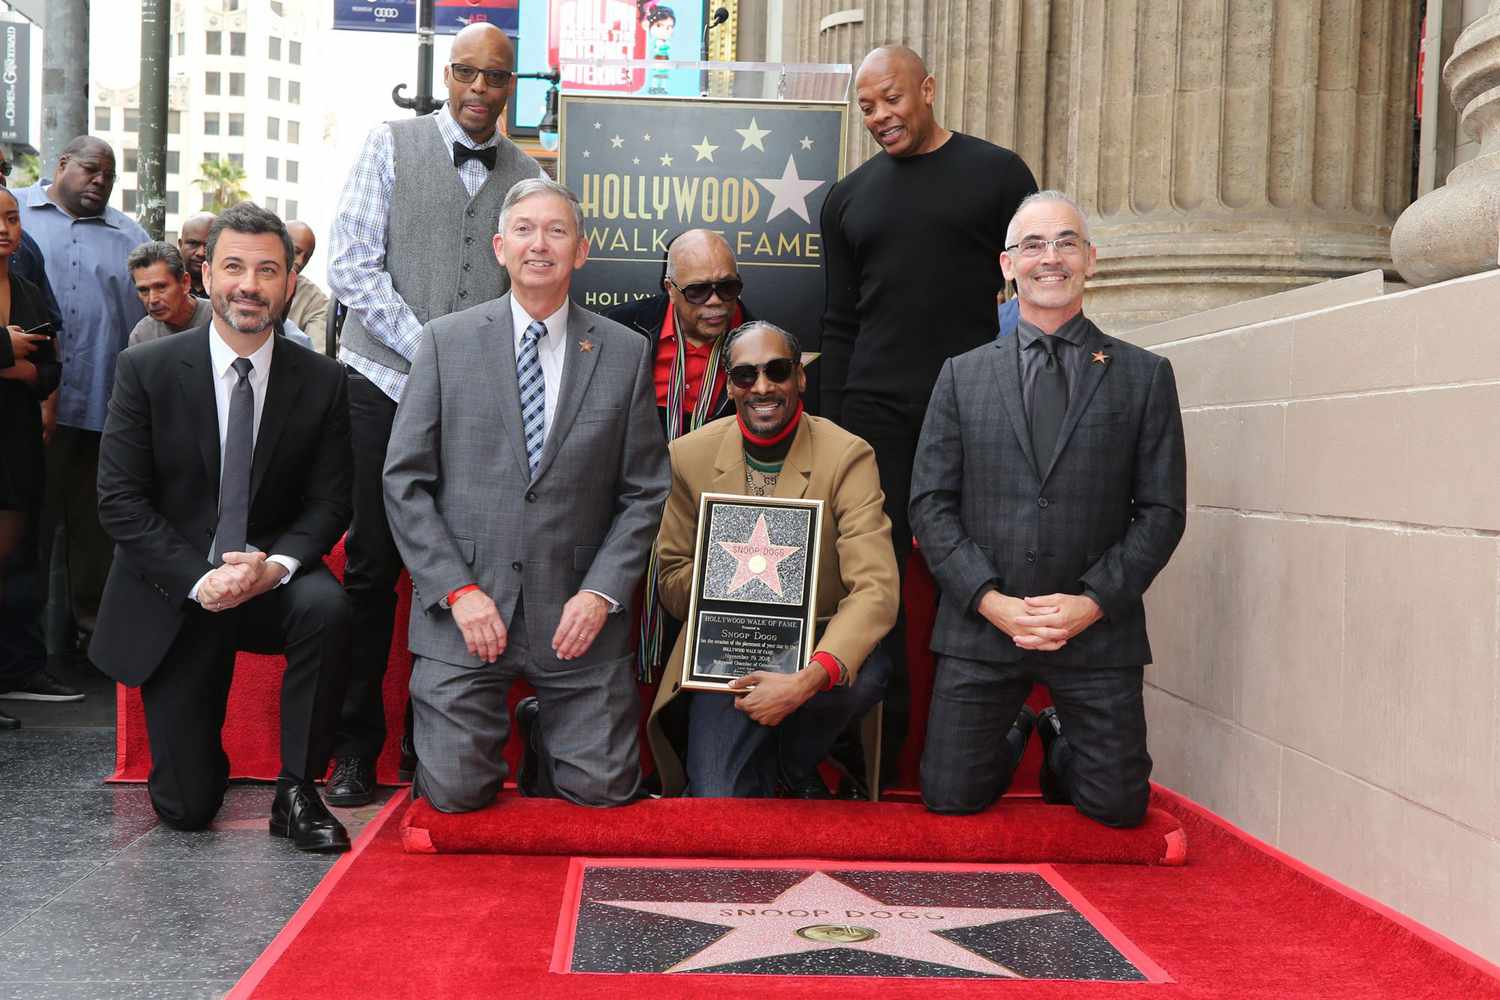 Snoop Dogg Receives a Star on the Hollywood Walk of Fame, Los Angeles, USA - 19 Nov 2018